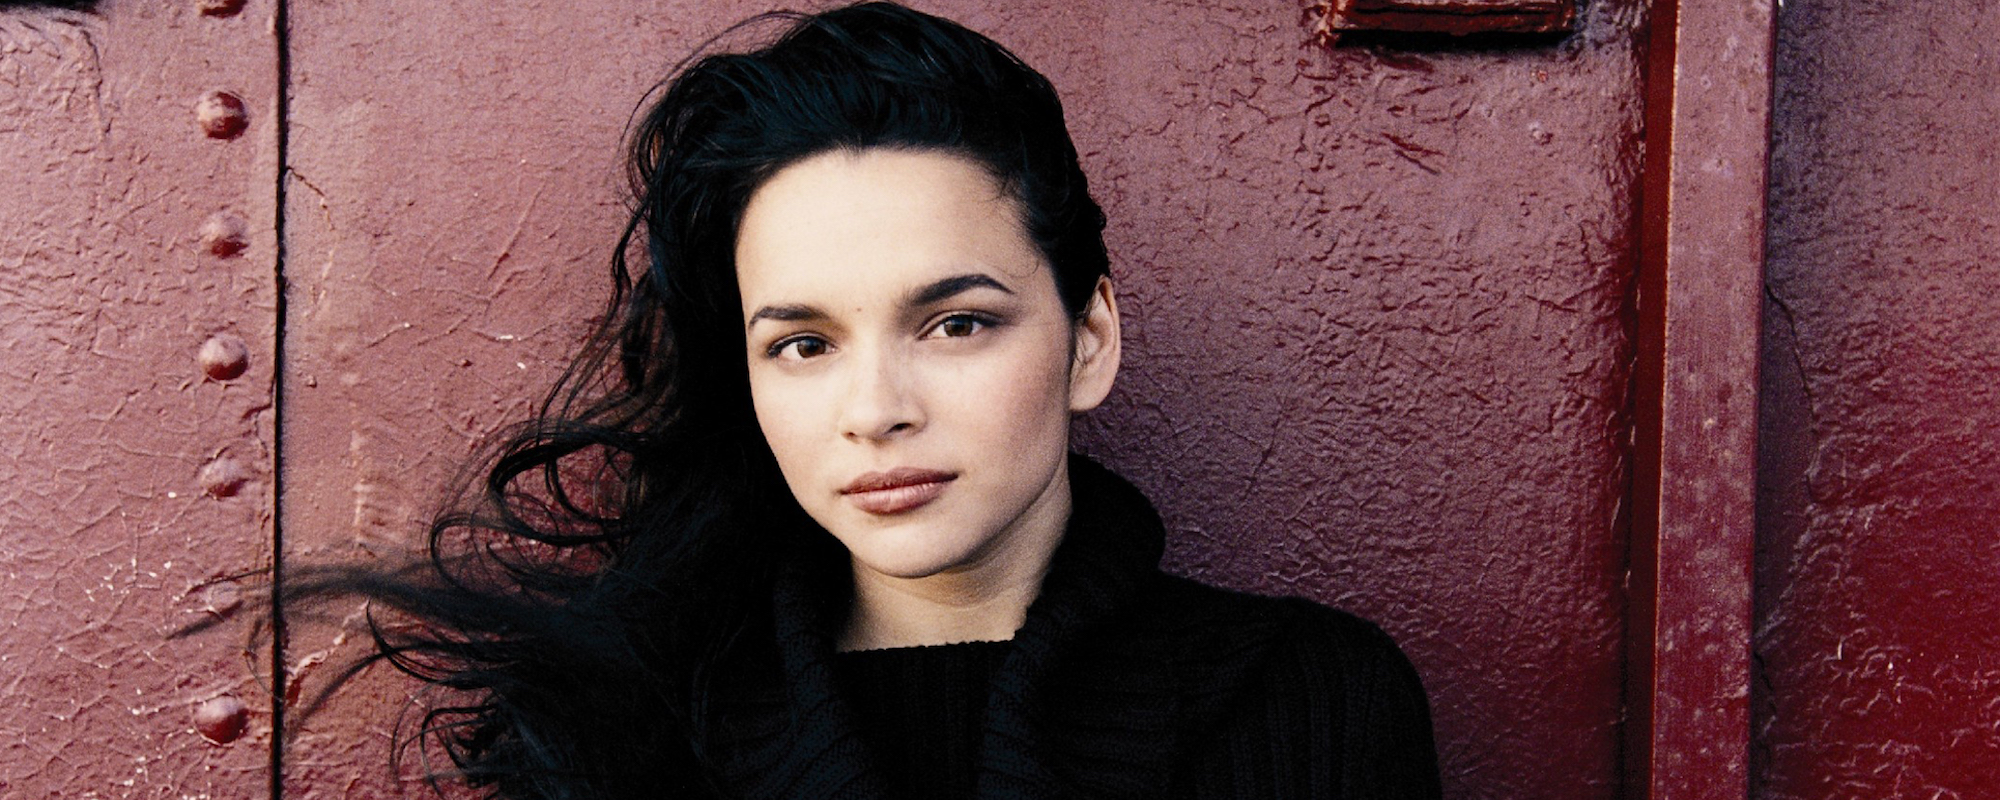 Norah Jones Returns to Original Recordings from ‘Come Away With Me’ 20 Years Later